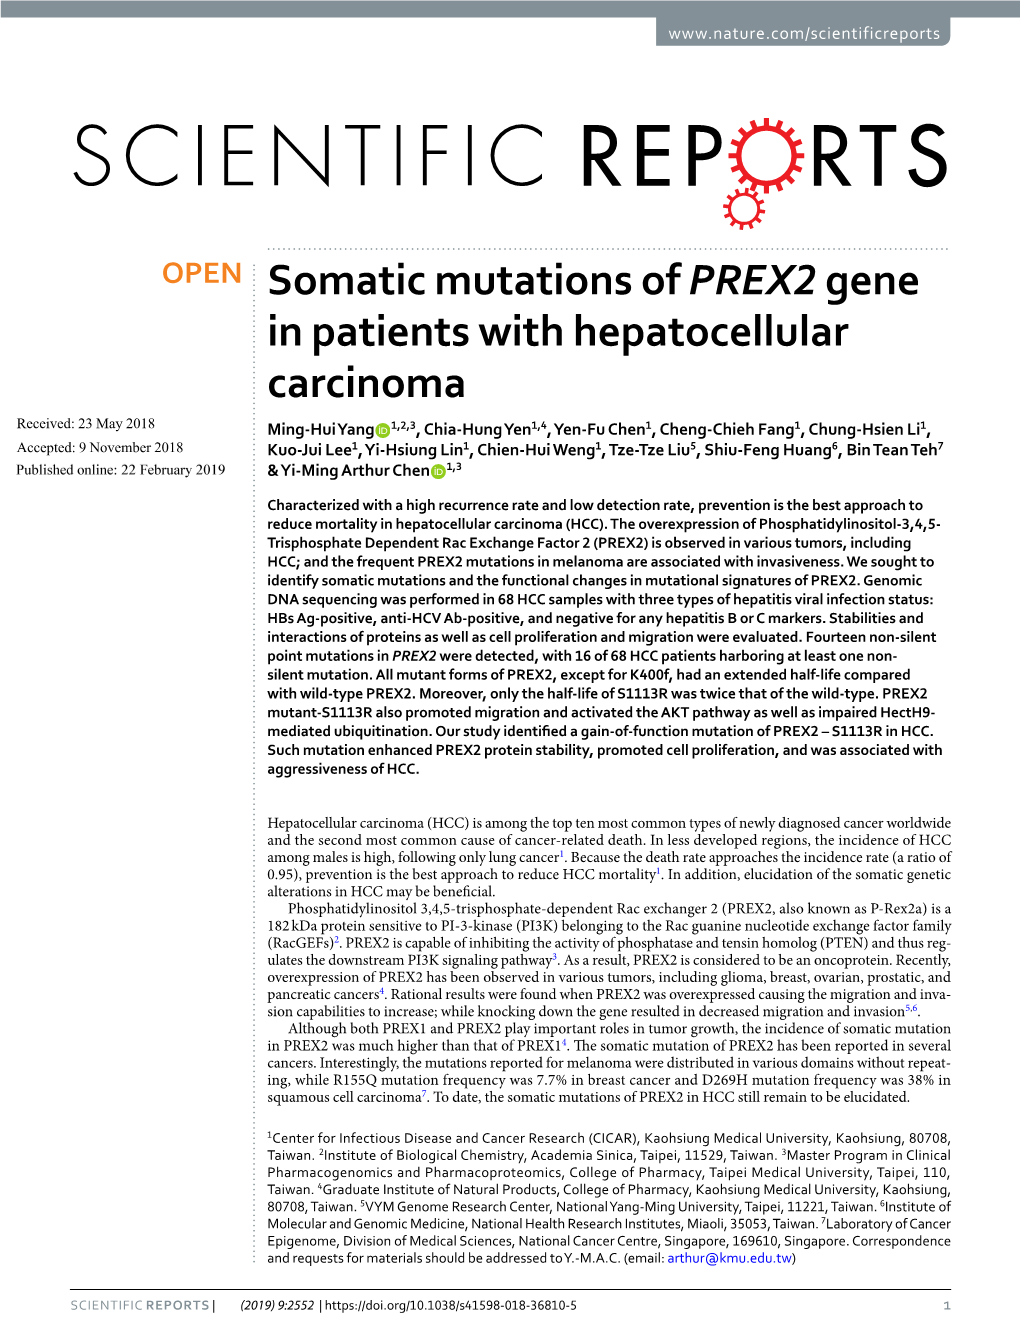 Somatic Mutations of PREX2 Gene in Patients with Hepatocellular Carcinoma